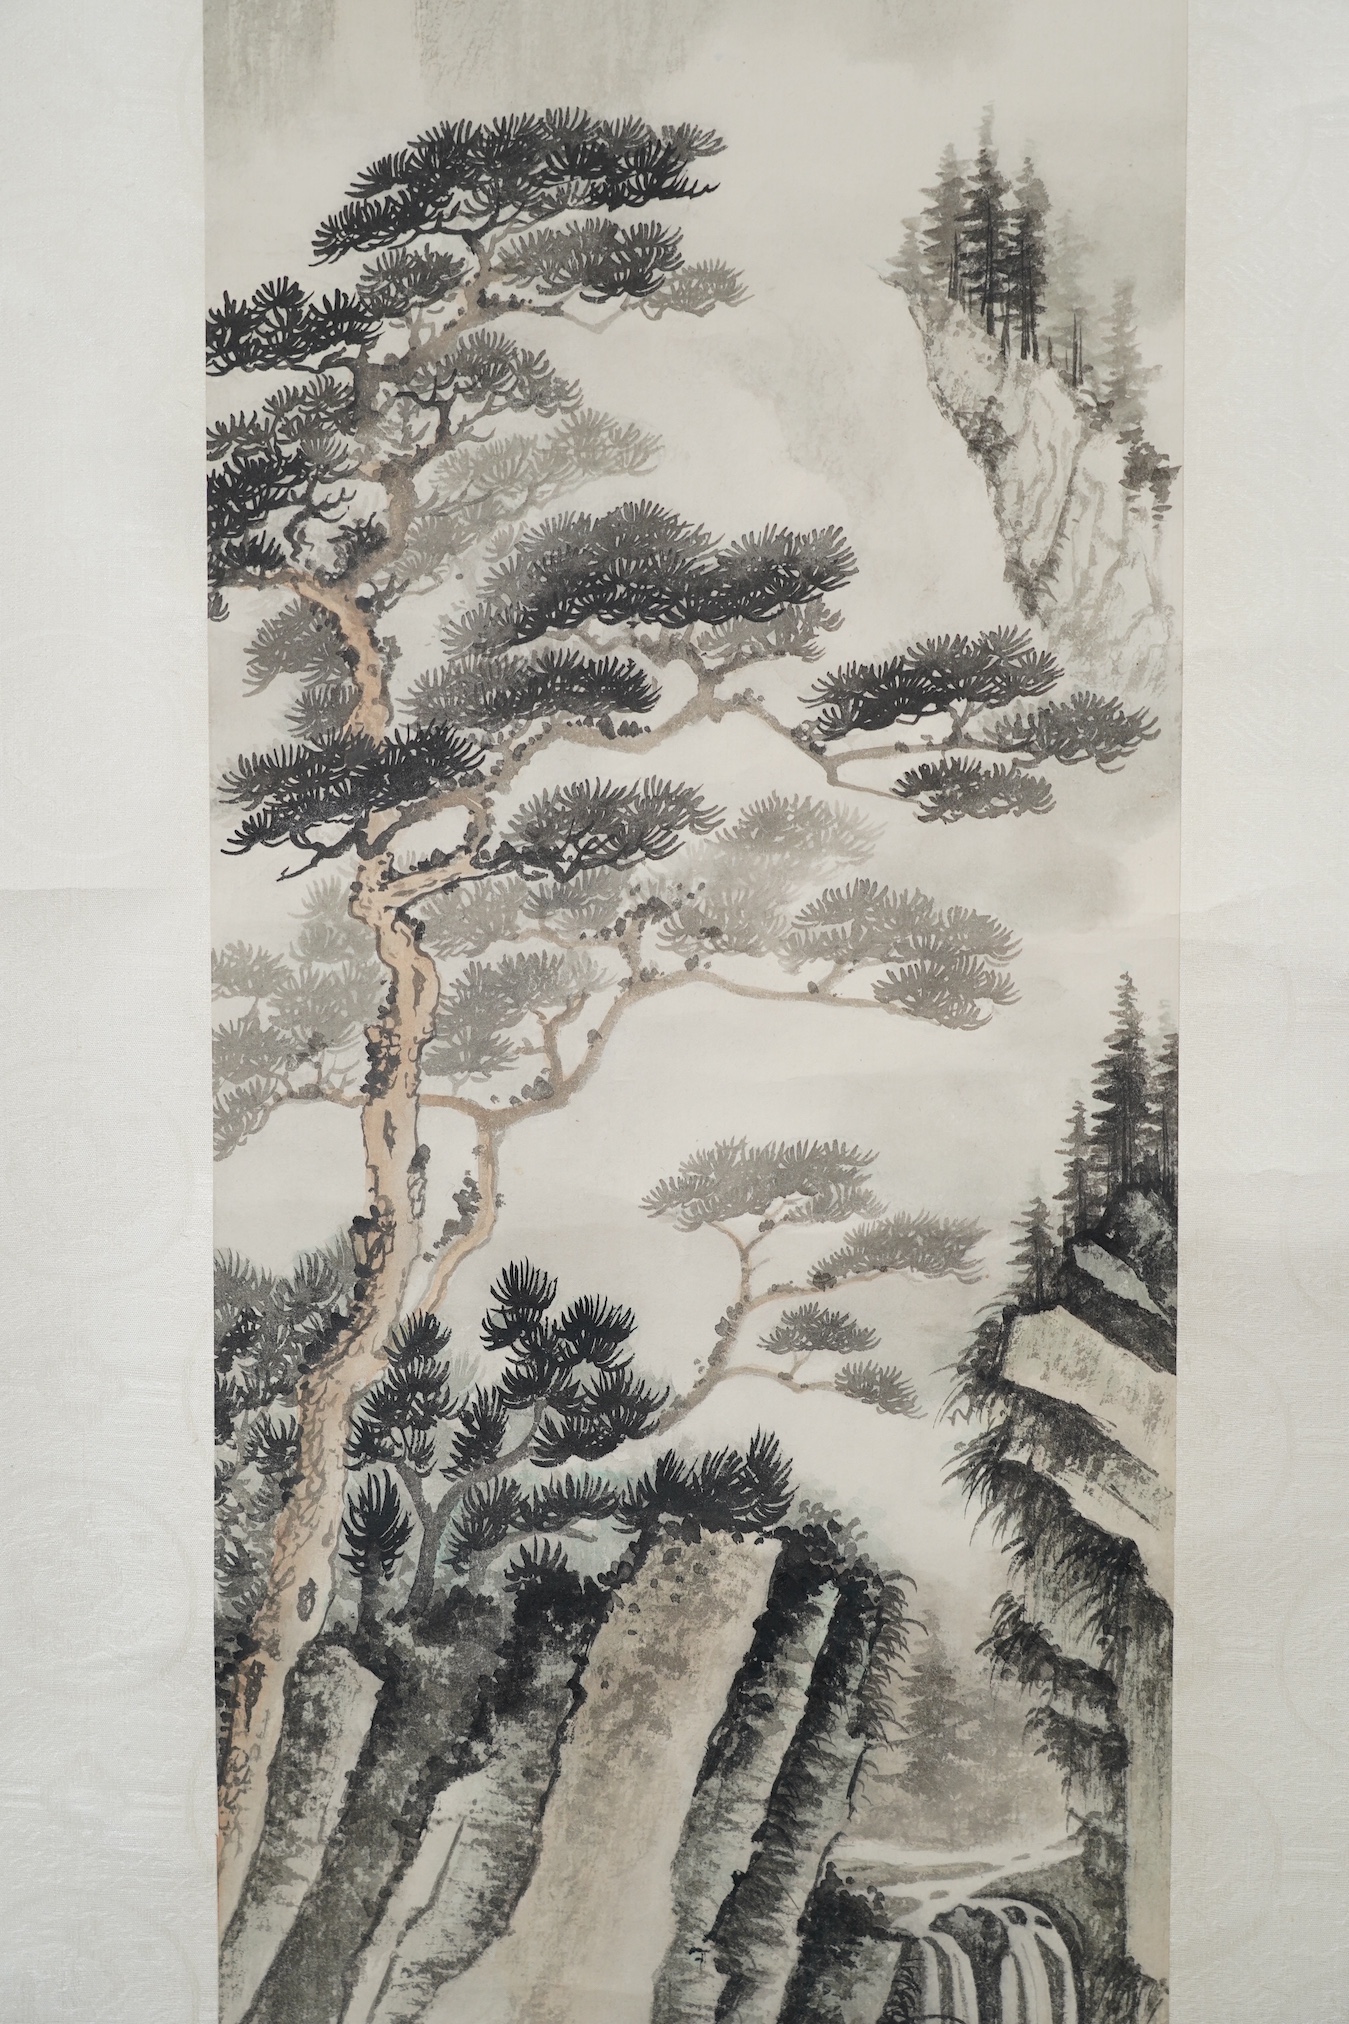 Manner of Huang Junbi, 20th/21st century, a set of four scroll paintings on paper of mountainous landscapes, boxed. Condition - fair to good